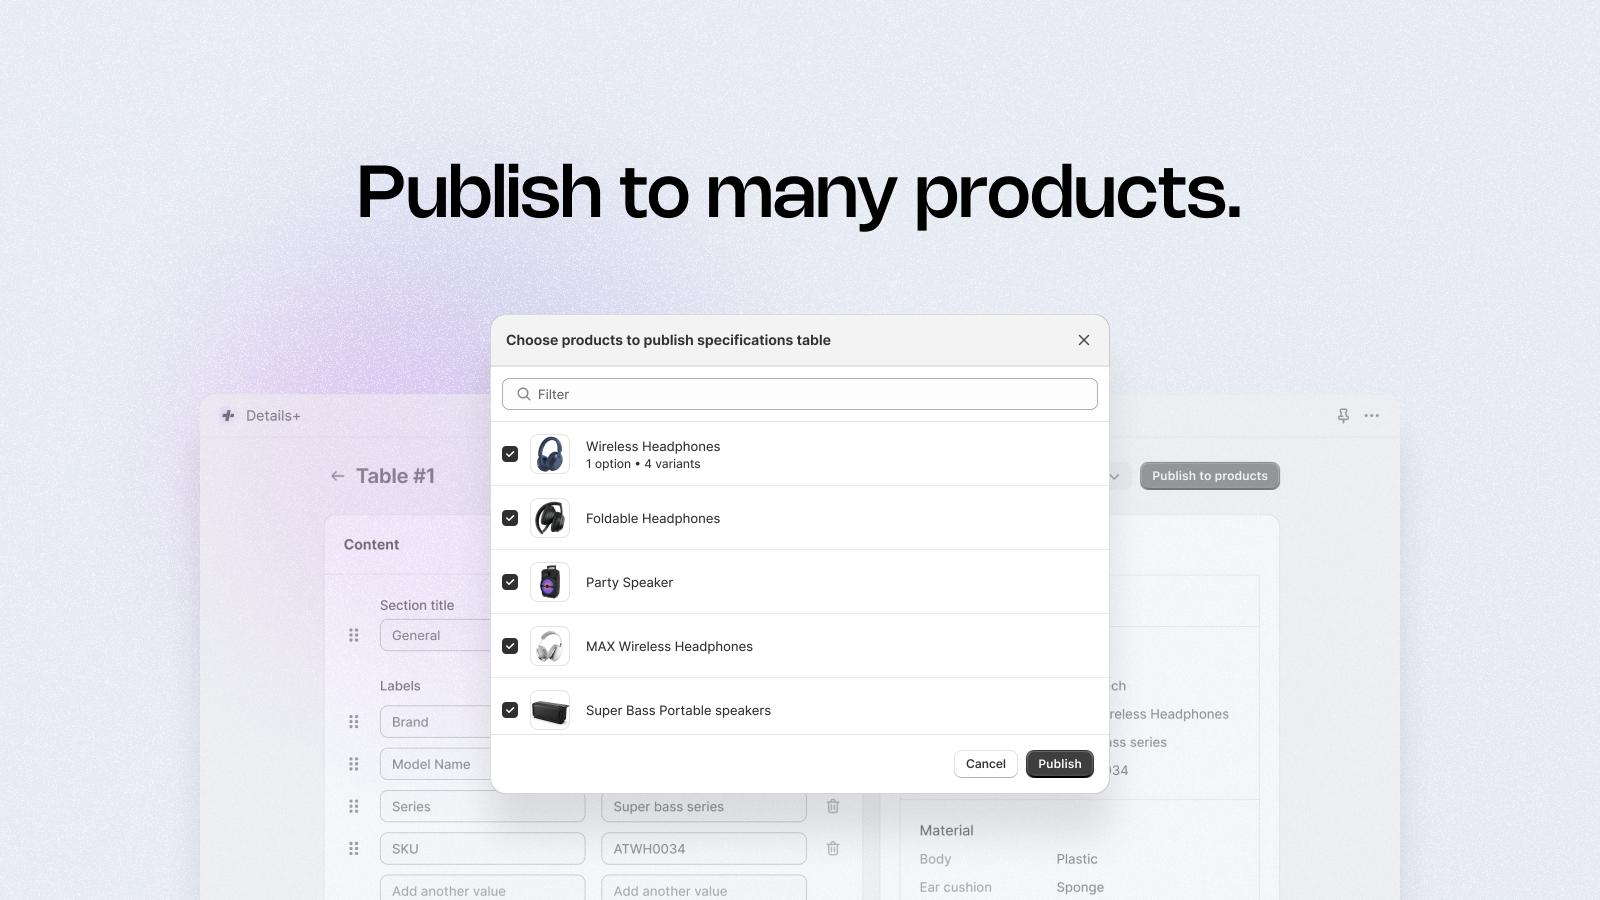 Publish to many products.